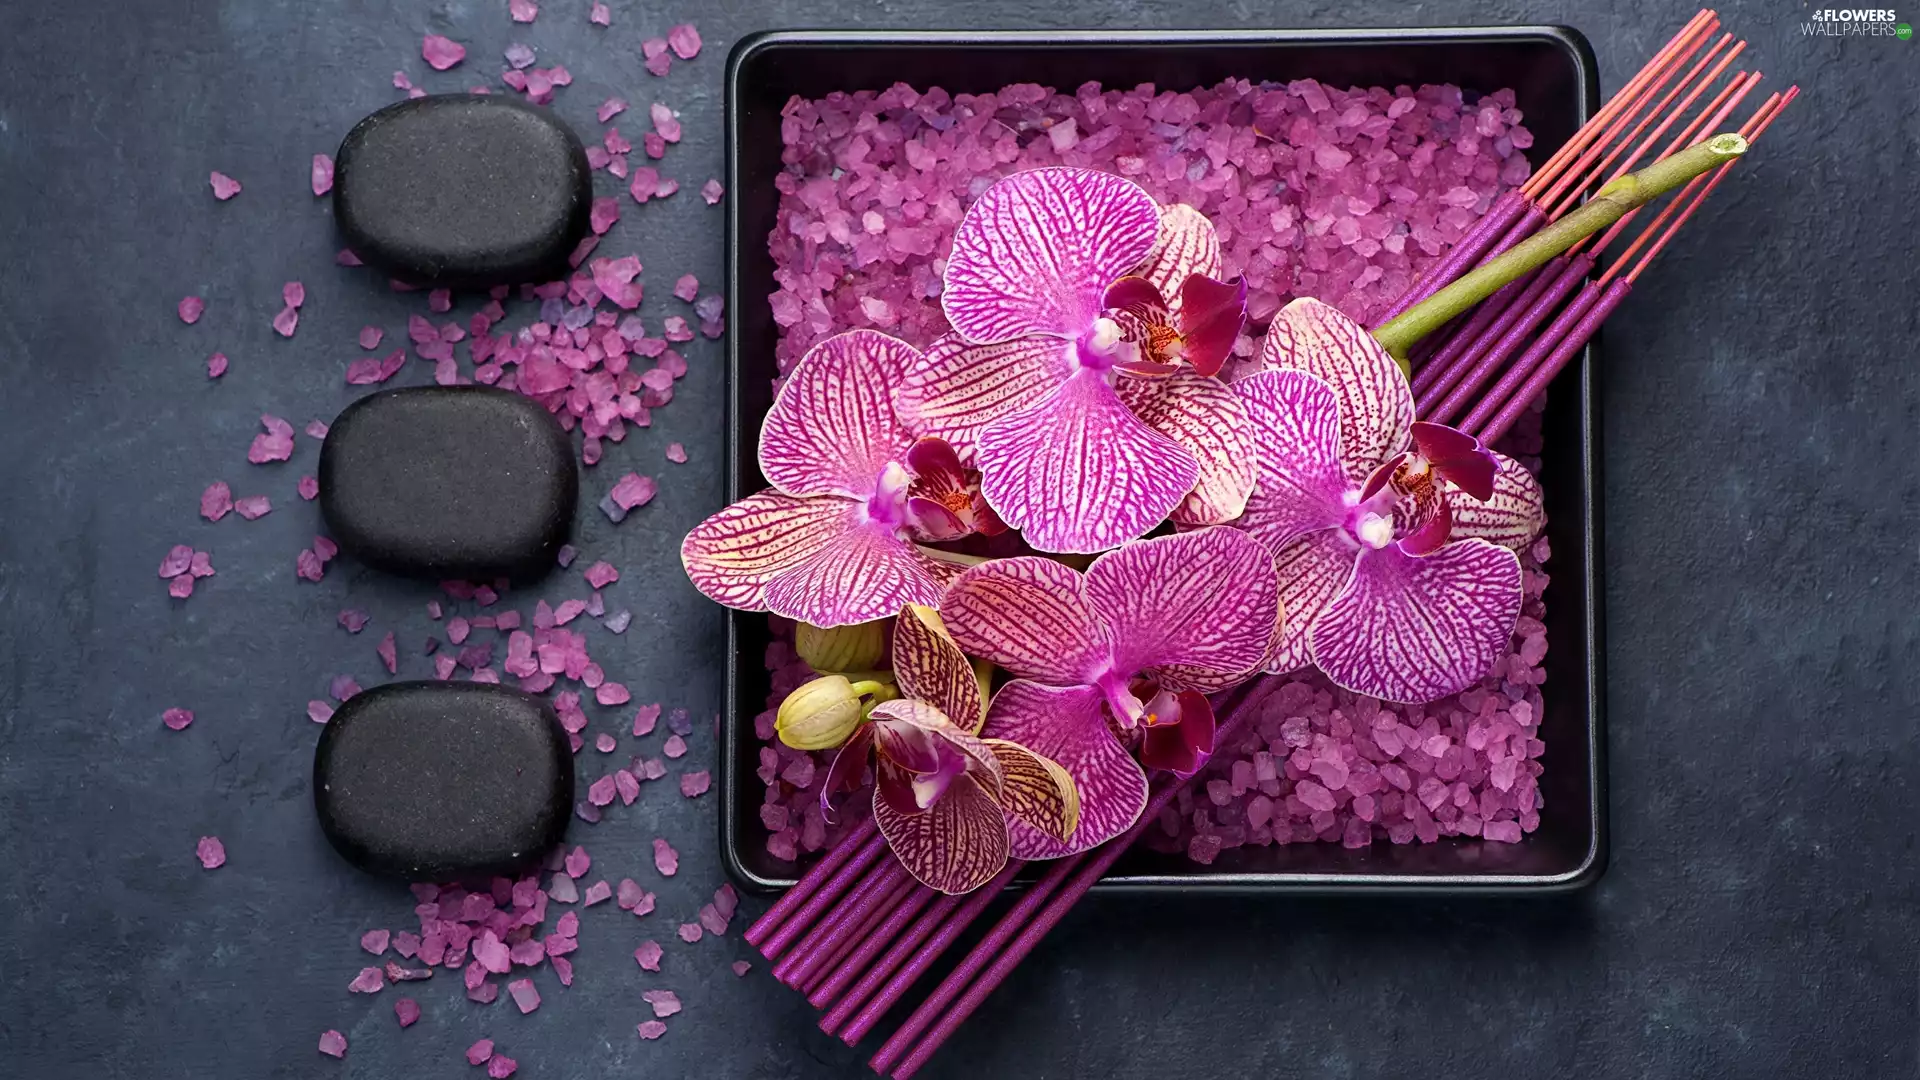 orchids, salt, Incense, crystals, Stones, Flowers, Spa, Tray